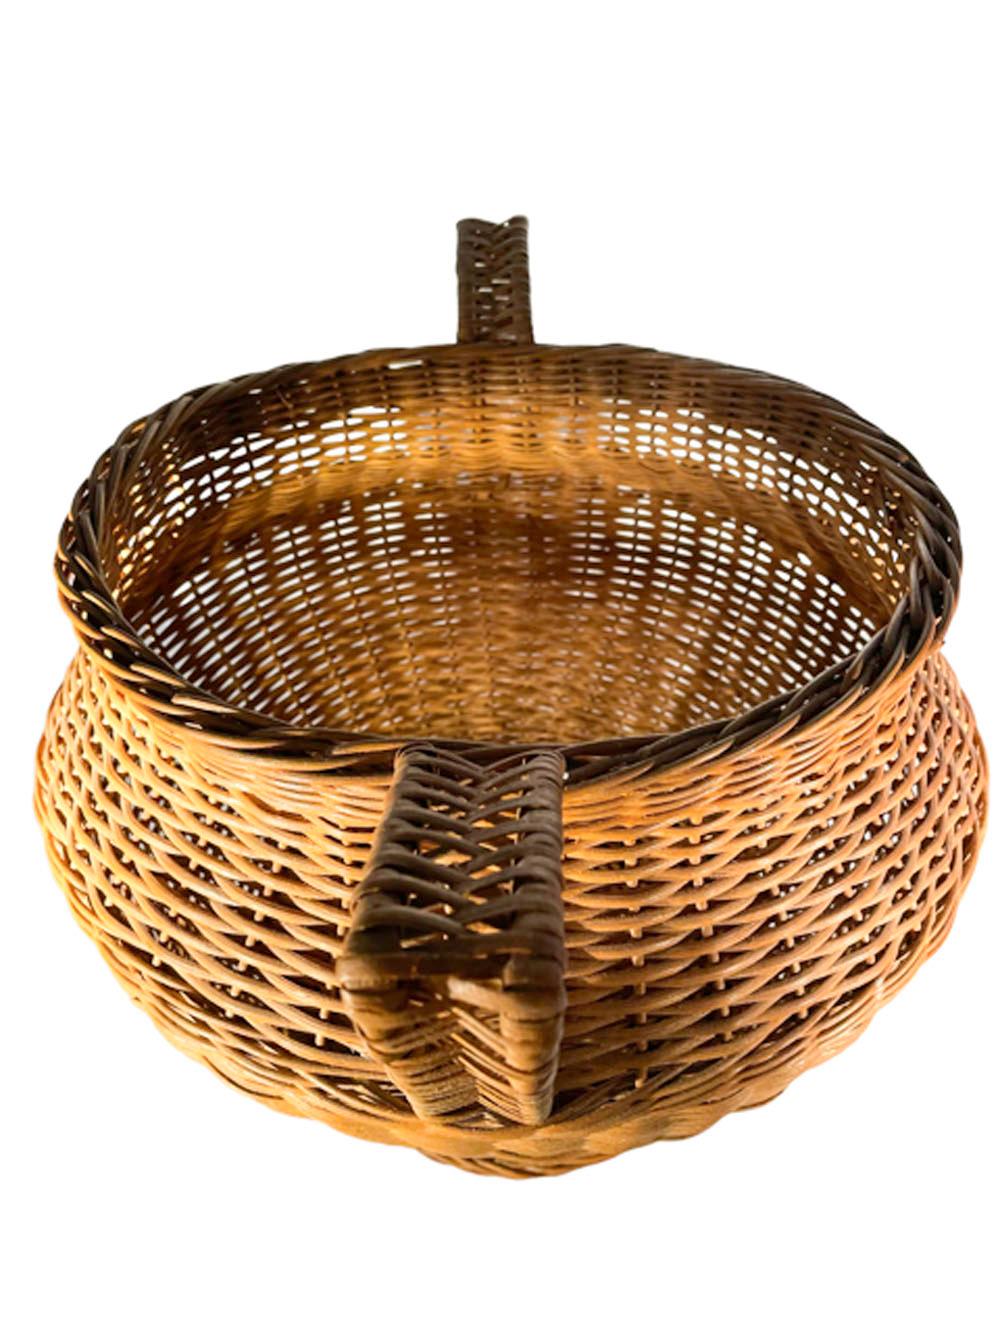 Large Art Deco Wicker Handled Cachepot Retaining Its Haywood-Wakefield Label In Good Condition For Sale In Nantucket, MA